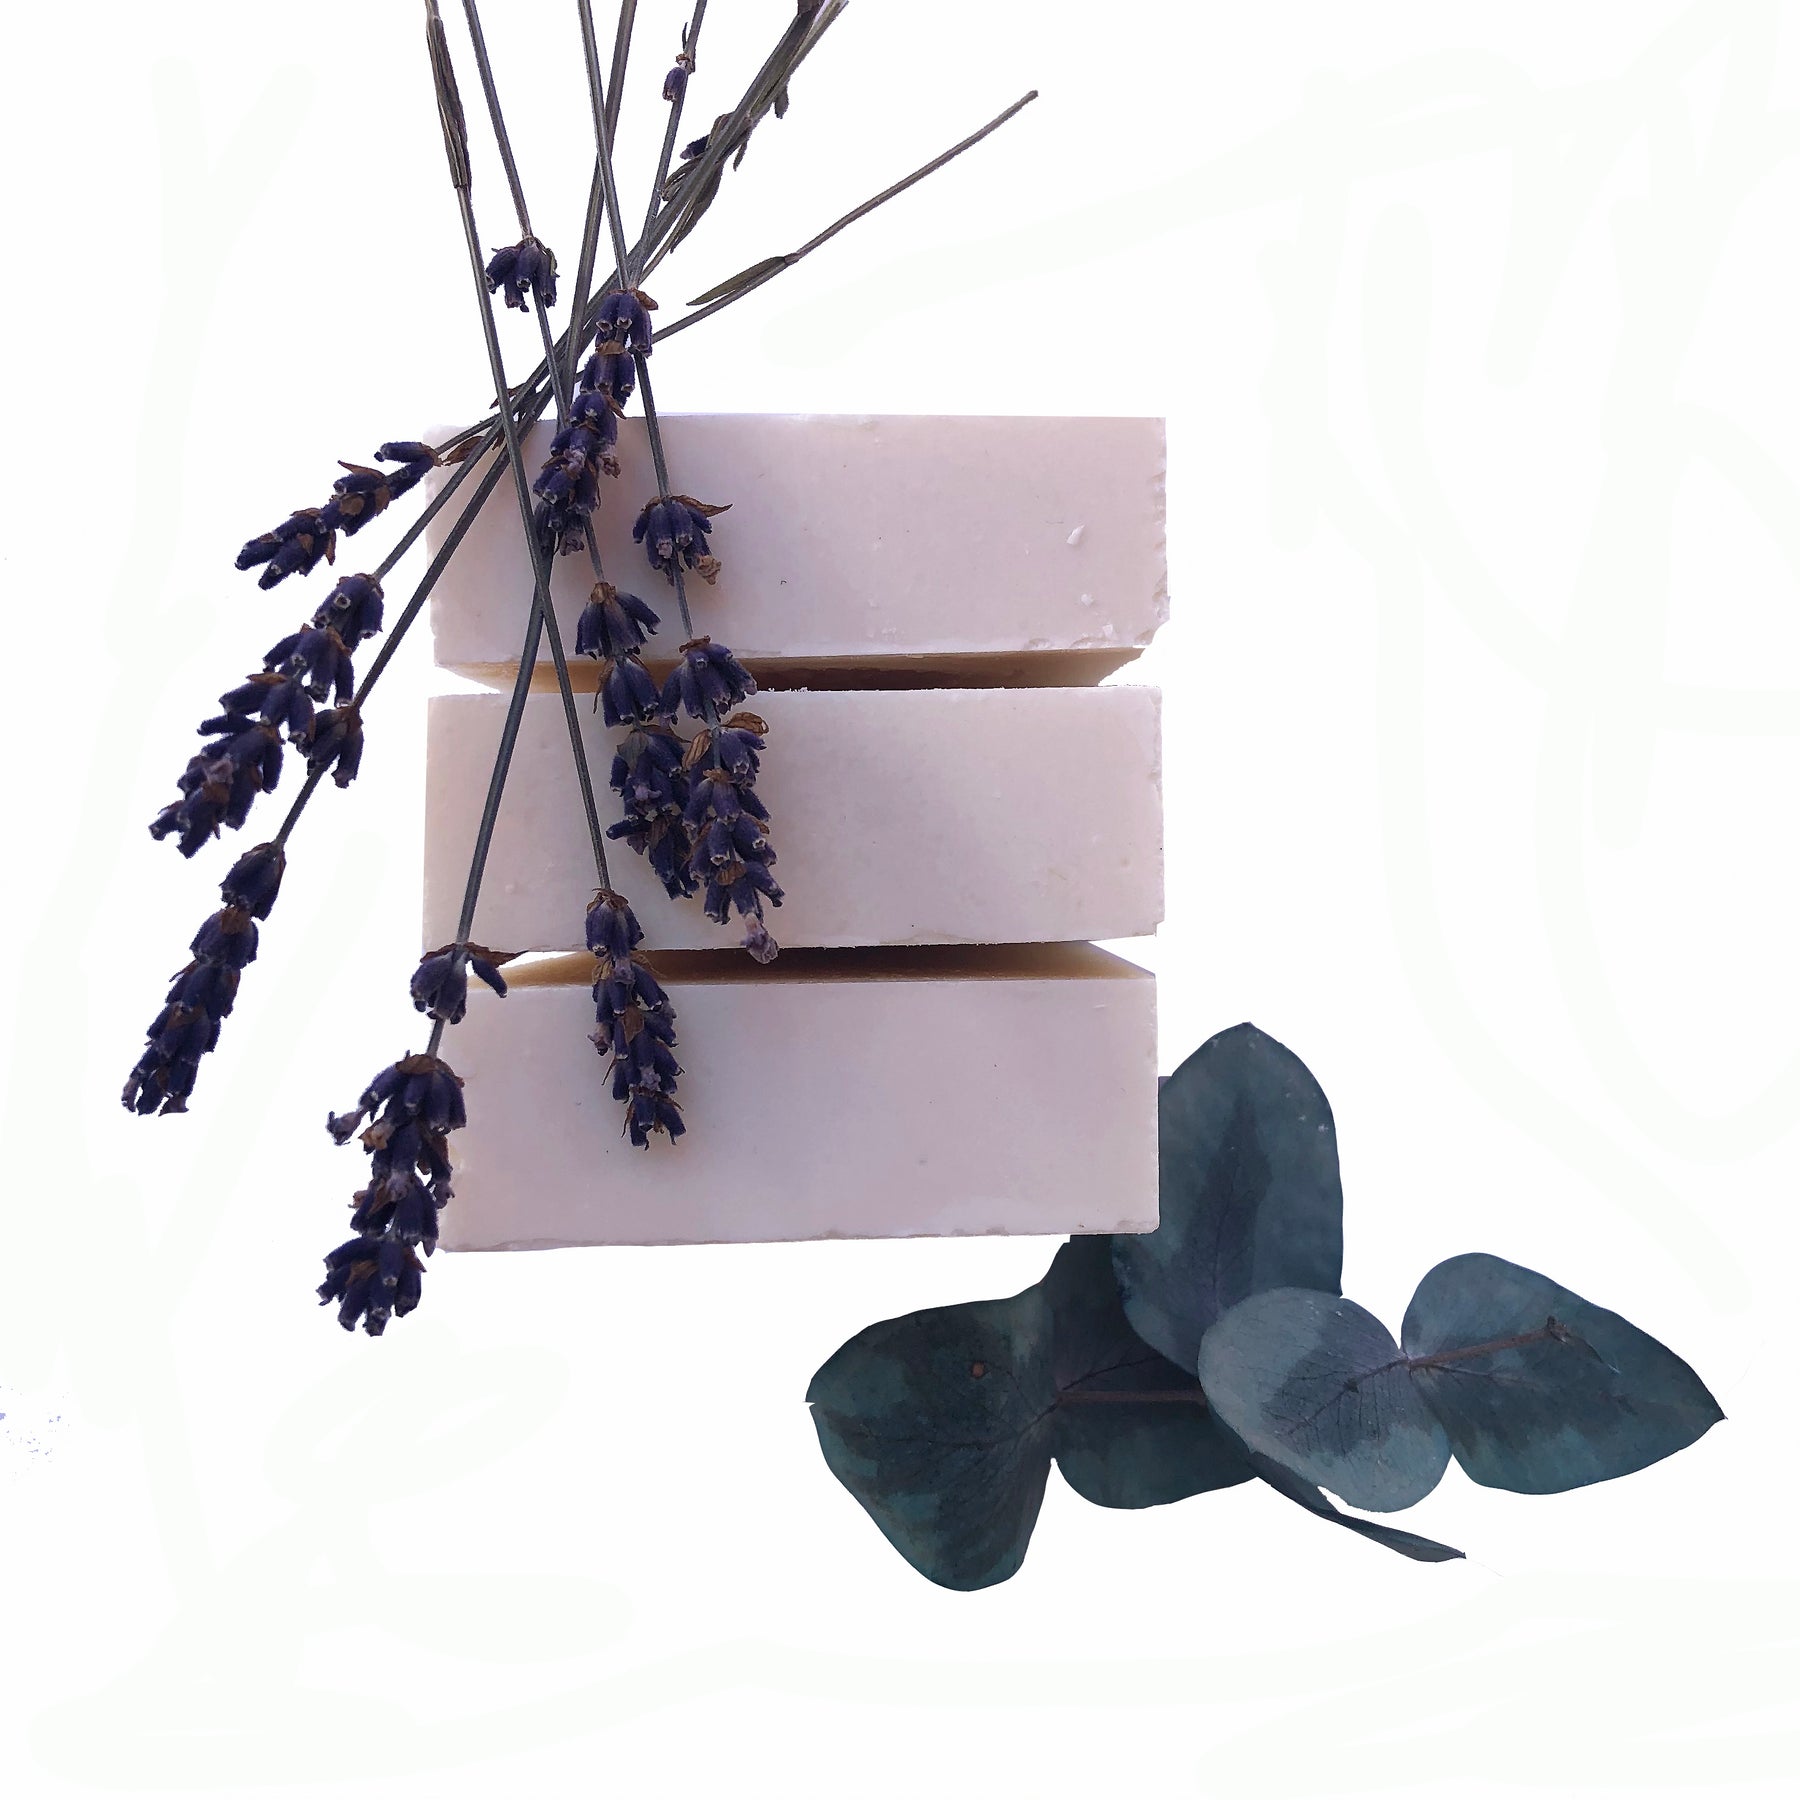 Why choose our natural soap?